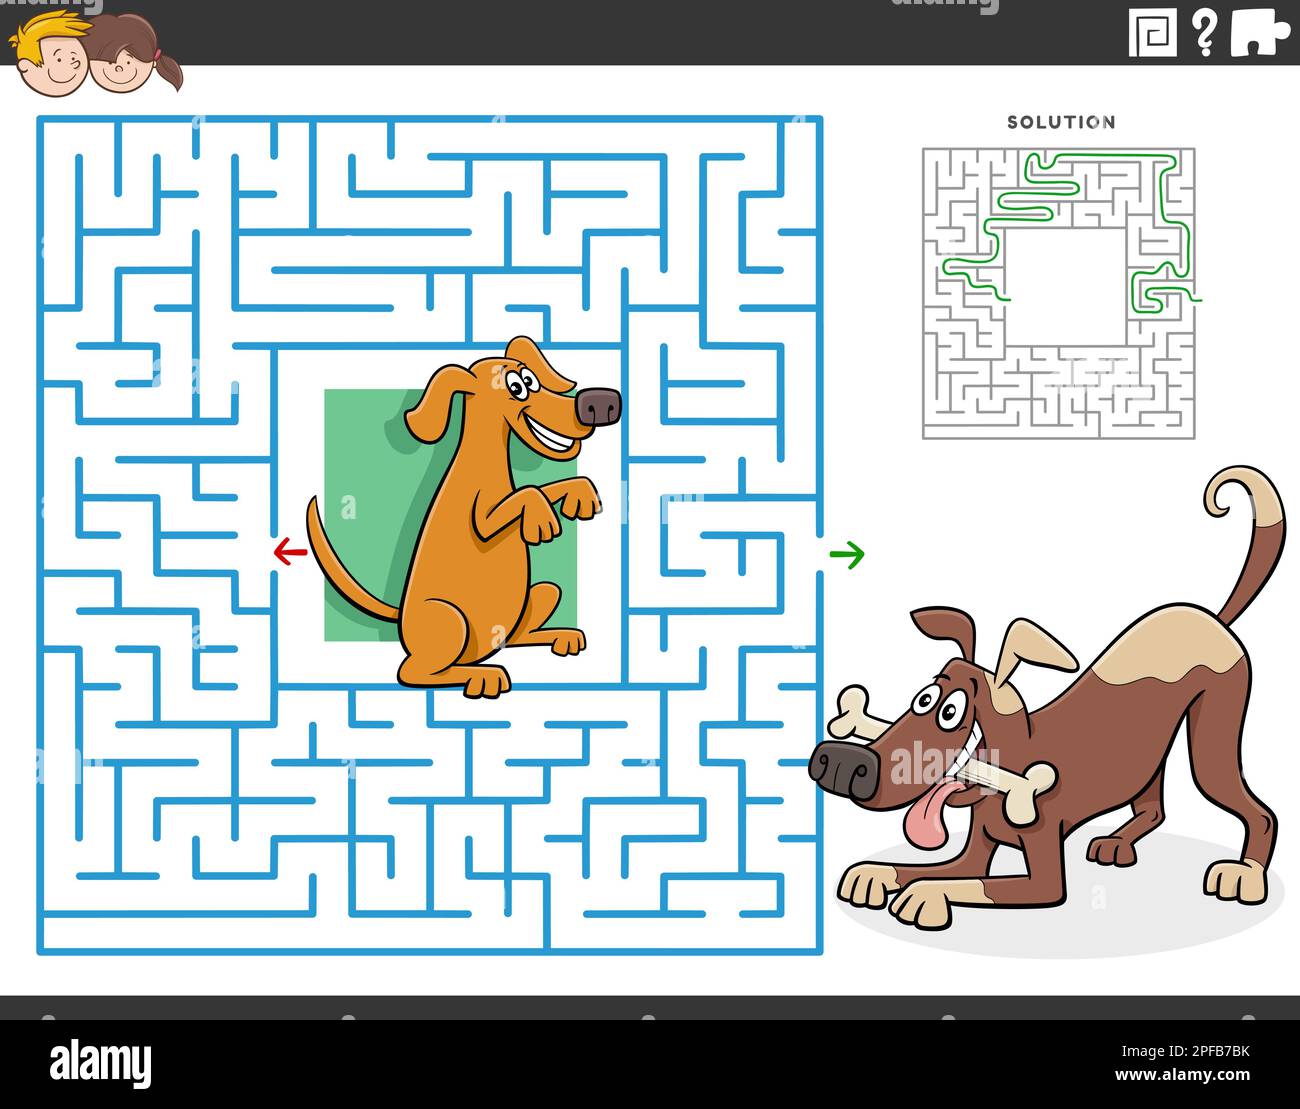 https://c8.alamy.com/comp/2PFB7BK/cartoon-illustration-of-educational-maze-puzzle-game-for-children-with-funny-dogs-animal-characters-2PFB7BK.jpg